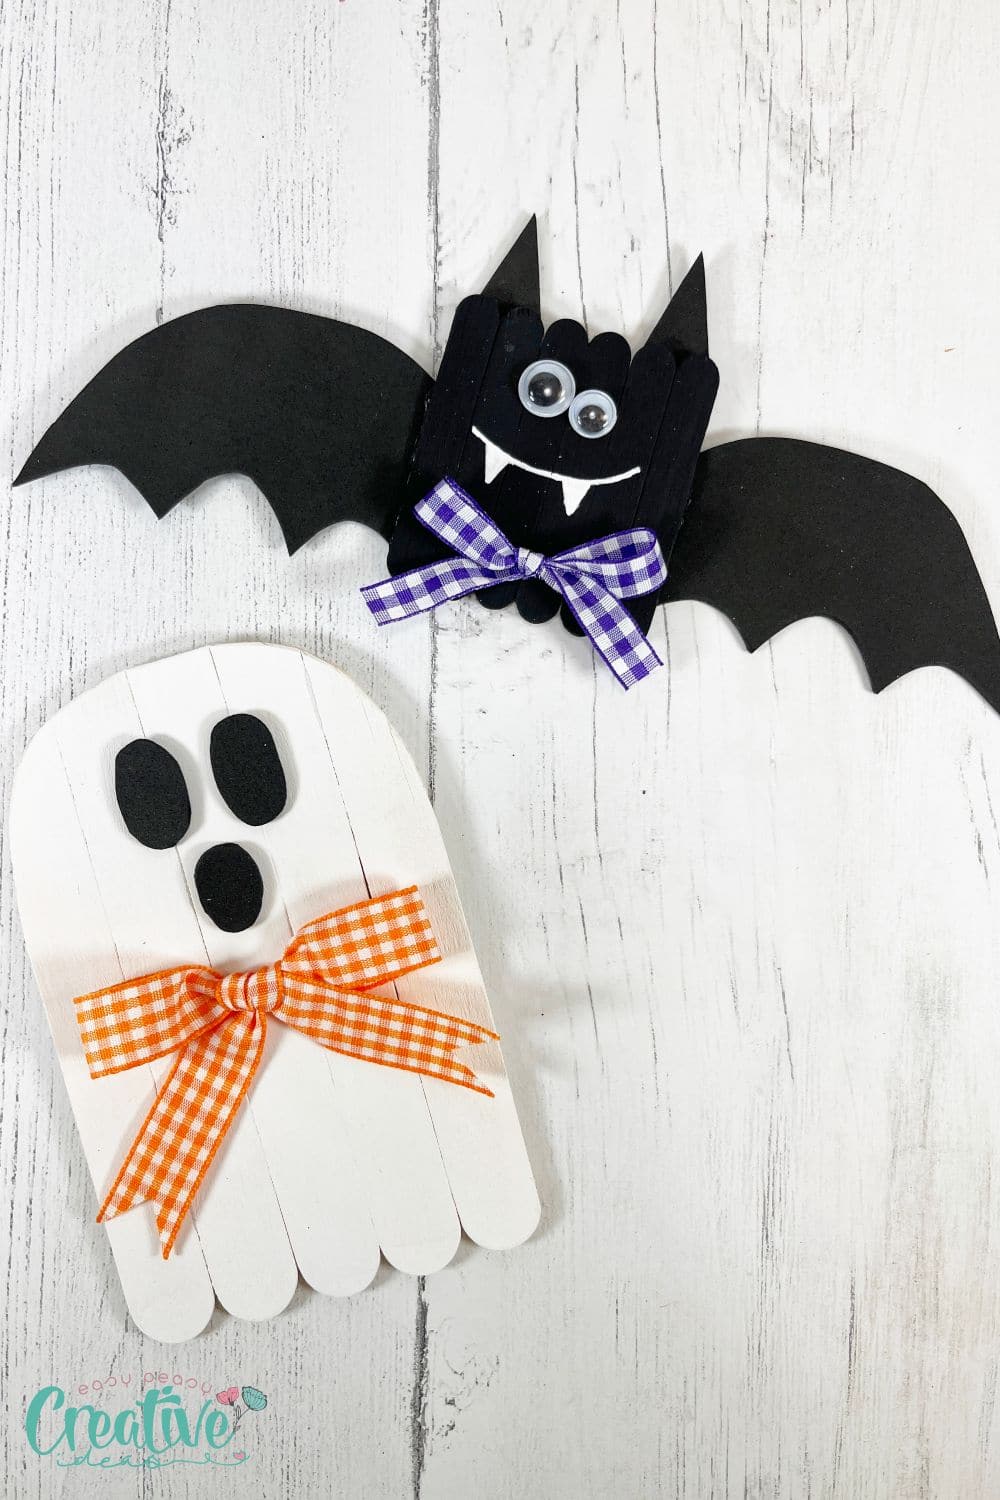 Dollar tree Halloween decorations – popsicle bat and ghost